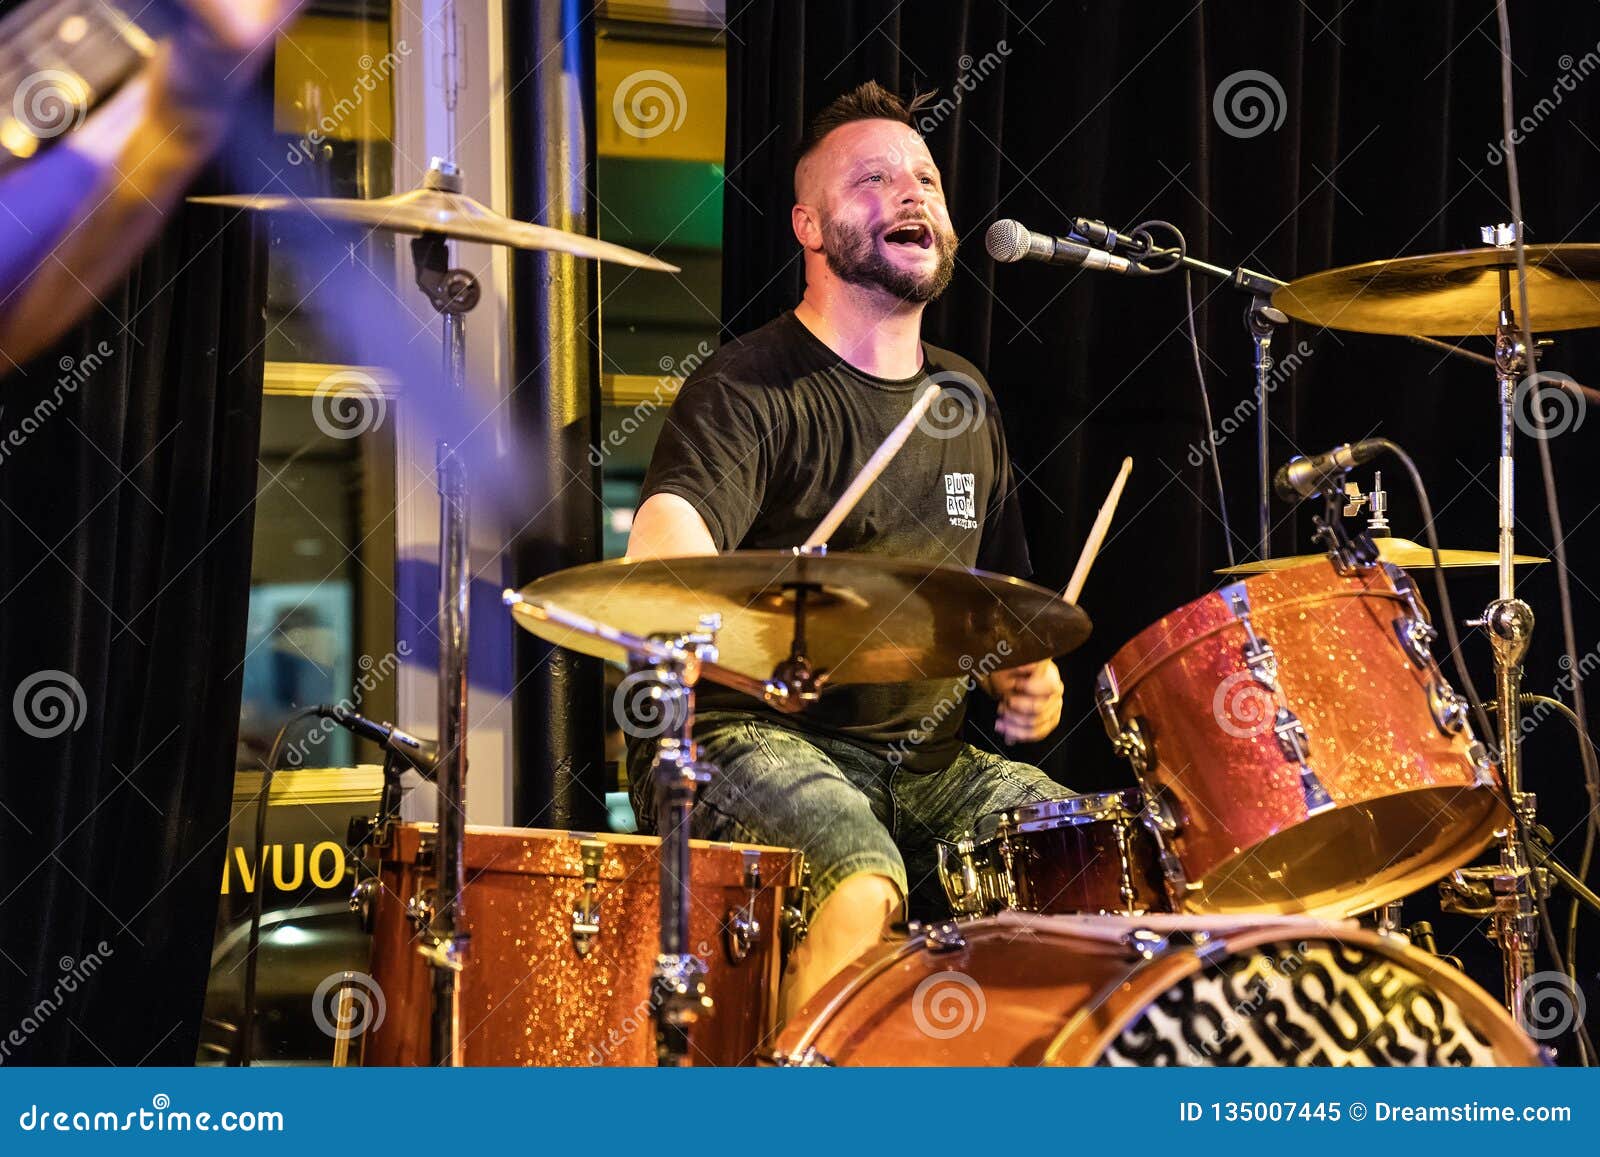 QUEBEC CITY, CANADA - MAY 18, 2018: Music Concert at the Petit ...